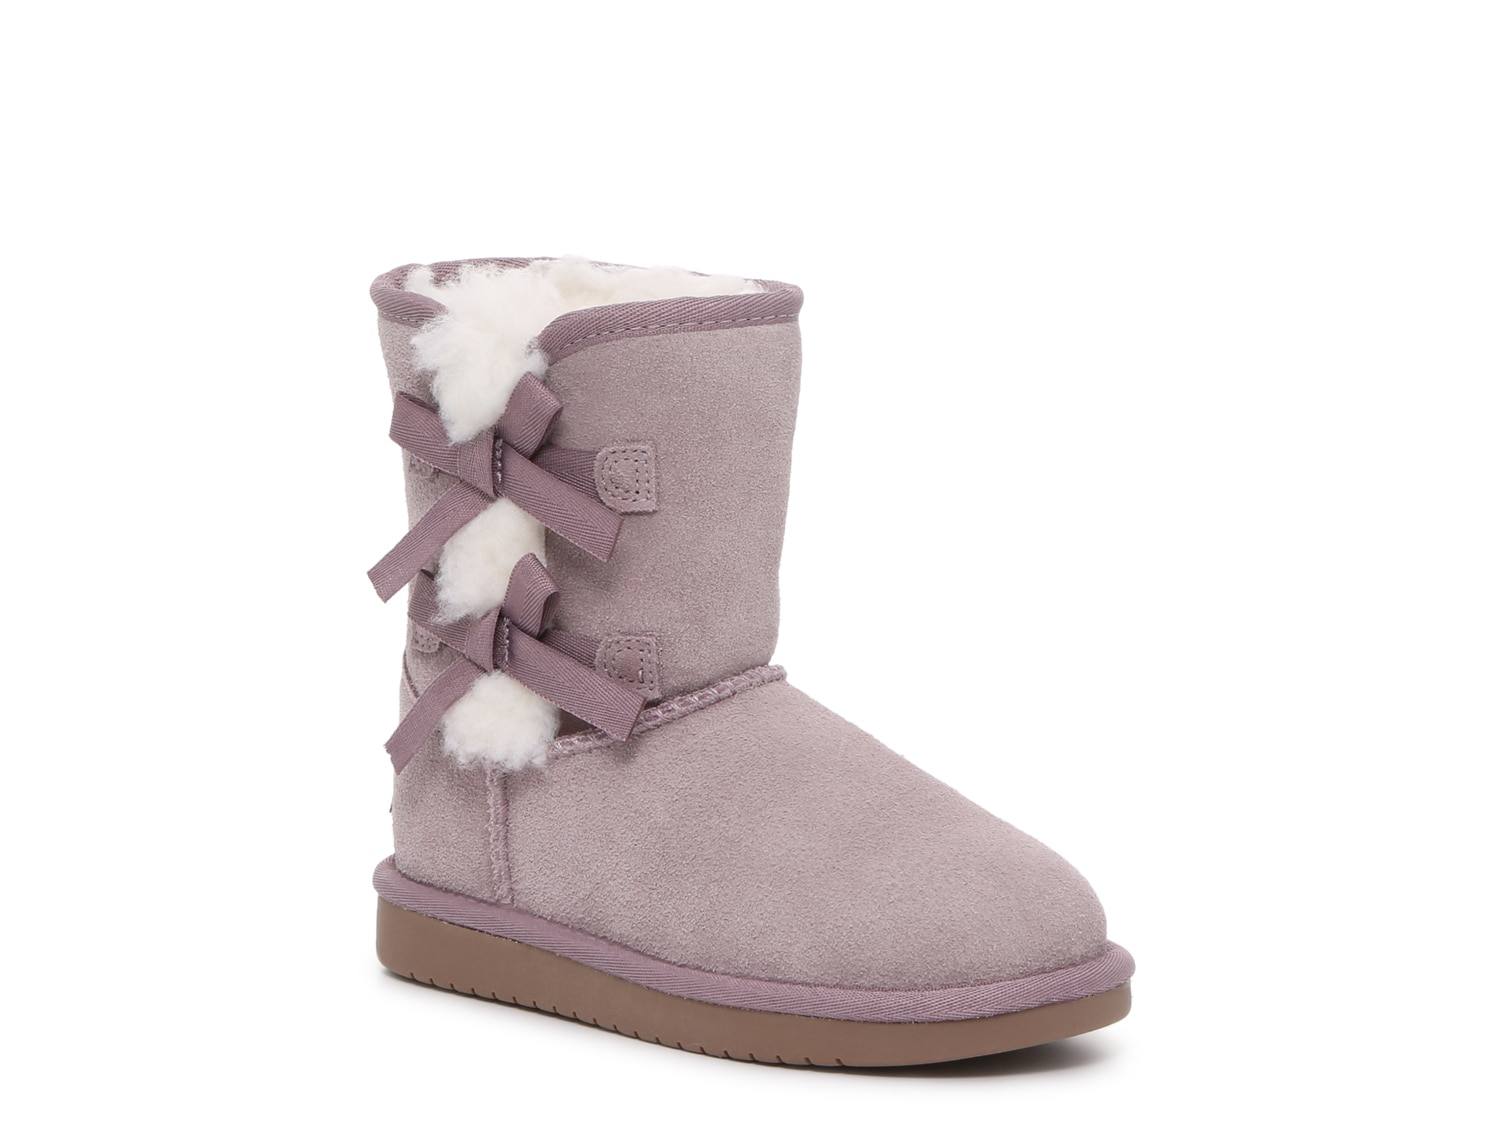 Koolaburra by UGG Boots, Slippers, Shoes & Sandals, DSW, DSW